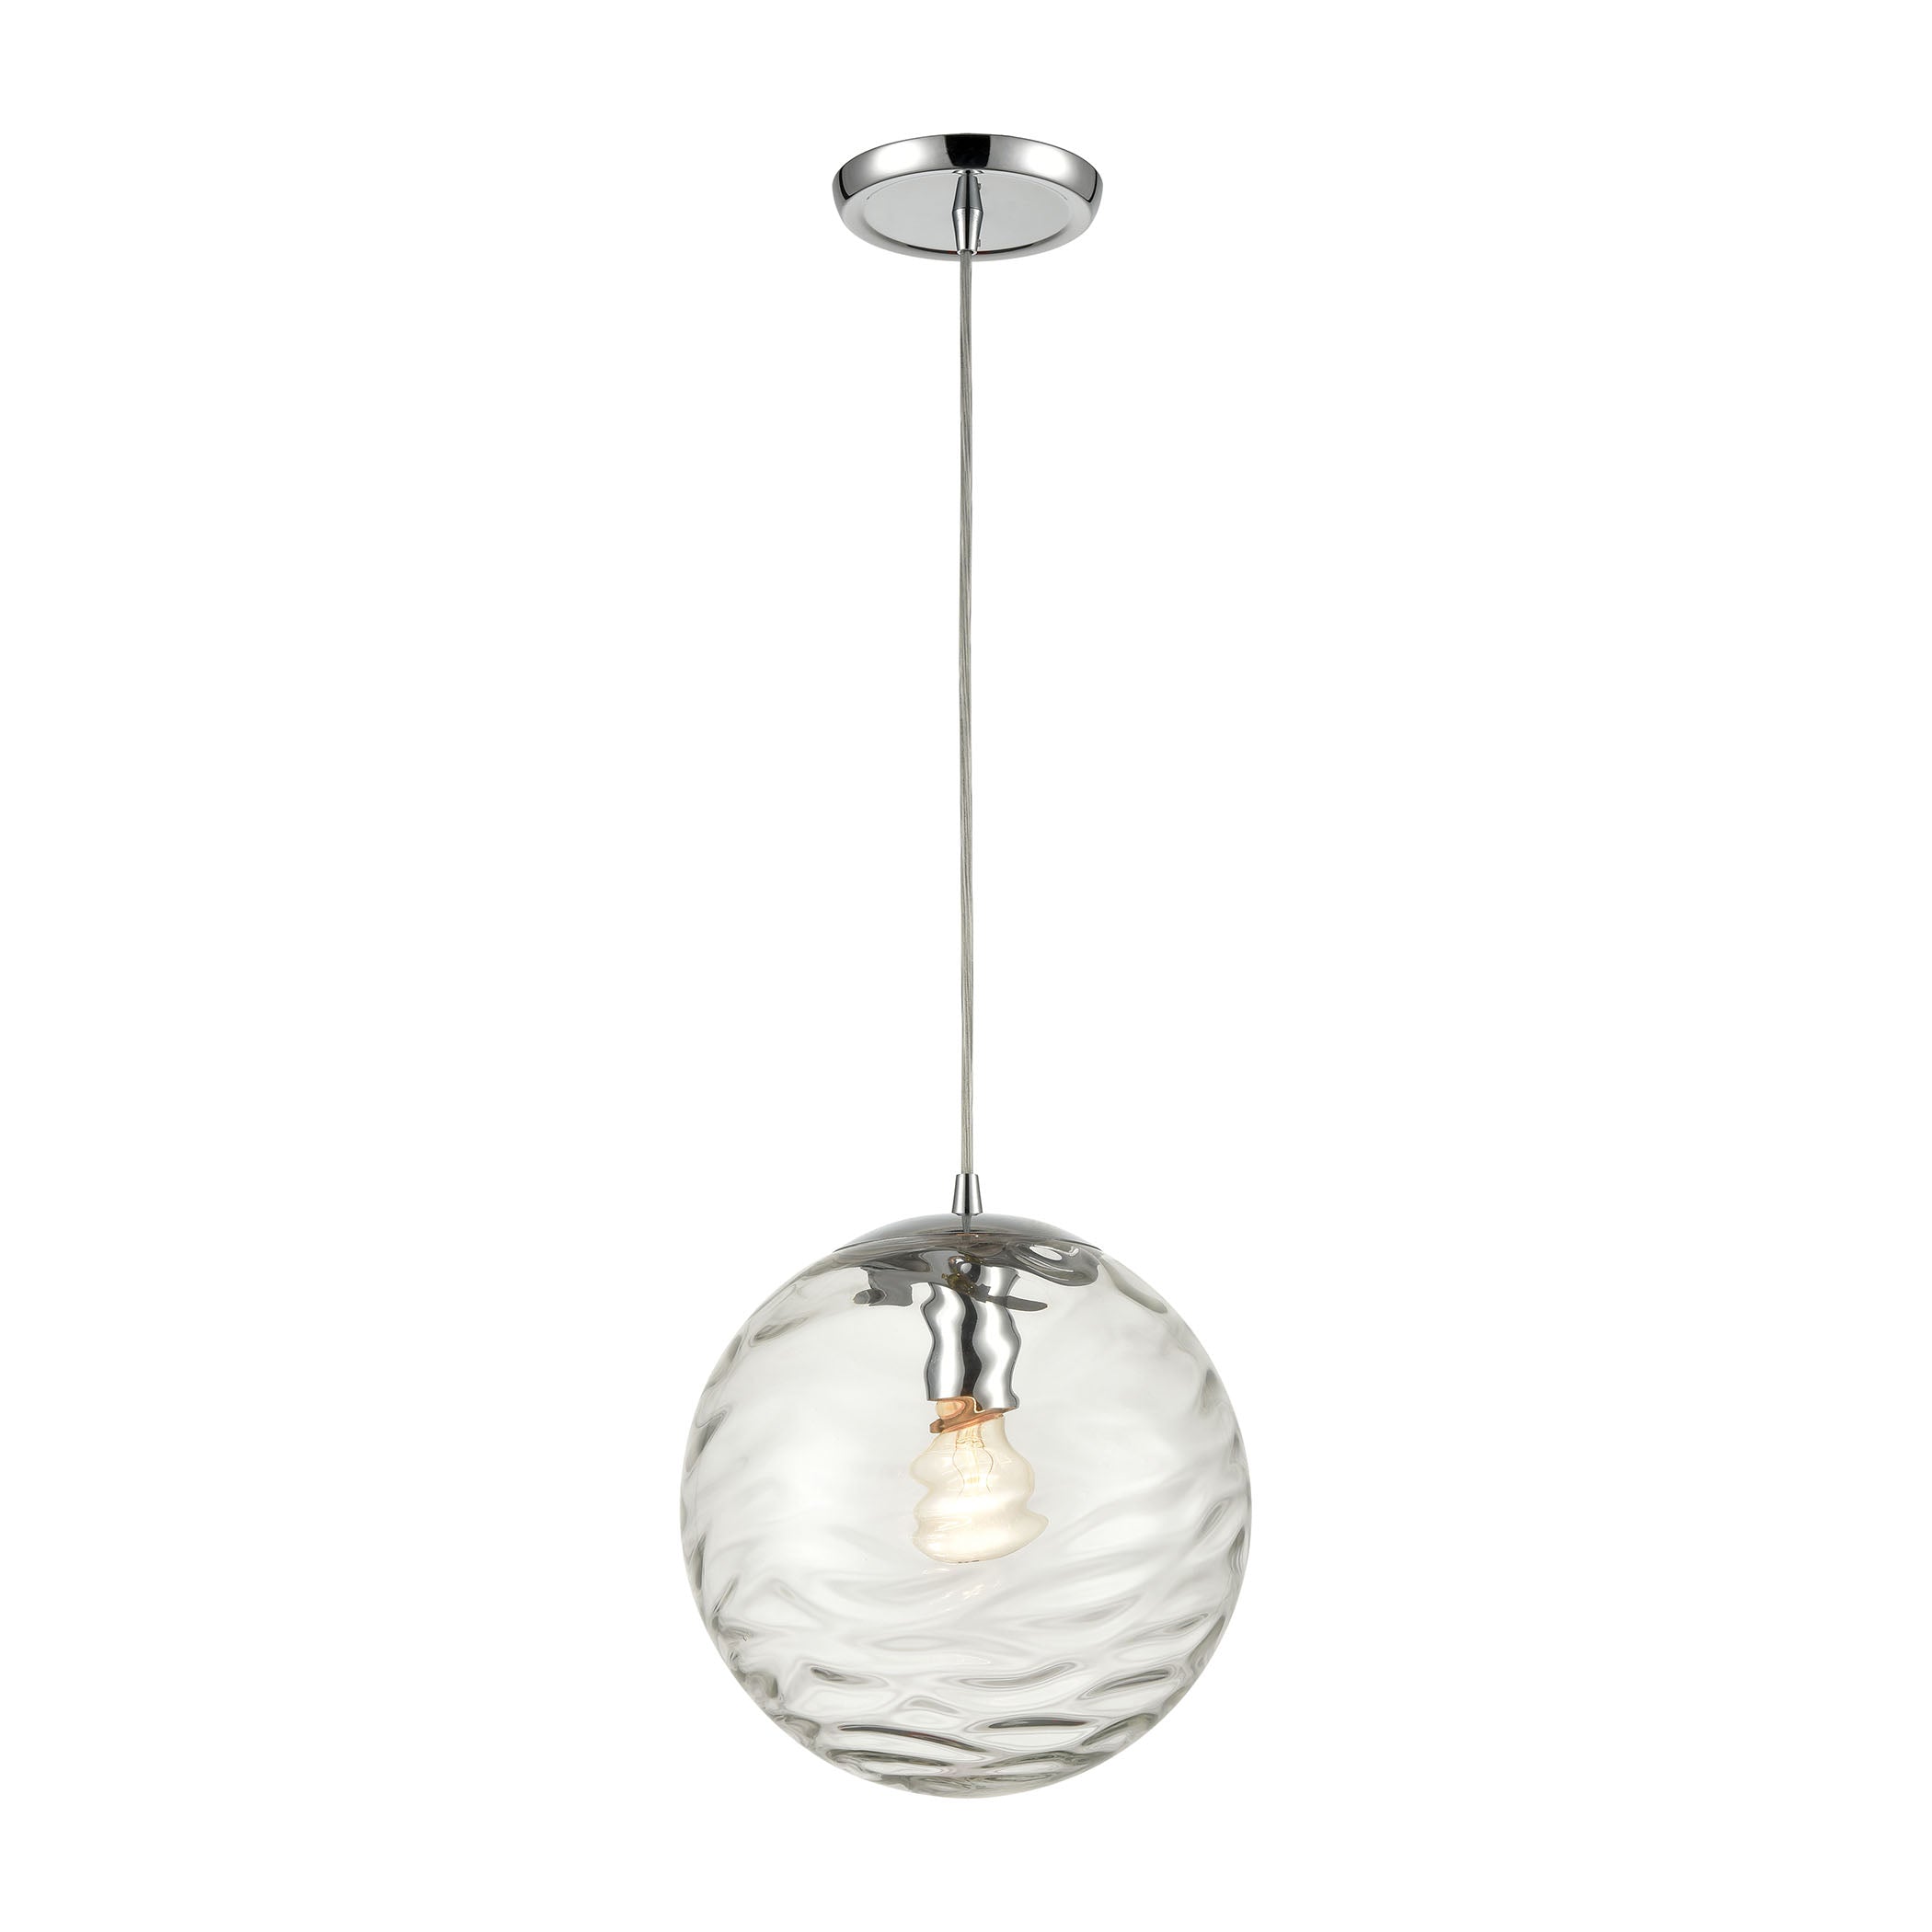 ELK Lighting 60184/1 Water's Edge 1-Light Mini Pendant in Polished Chrome with Water Glass